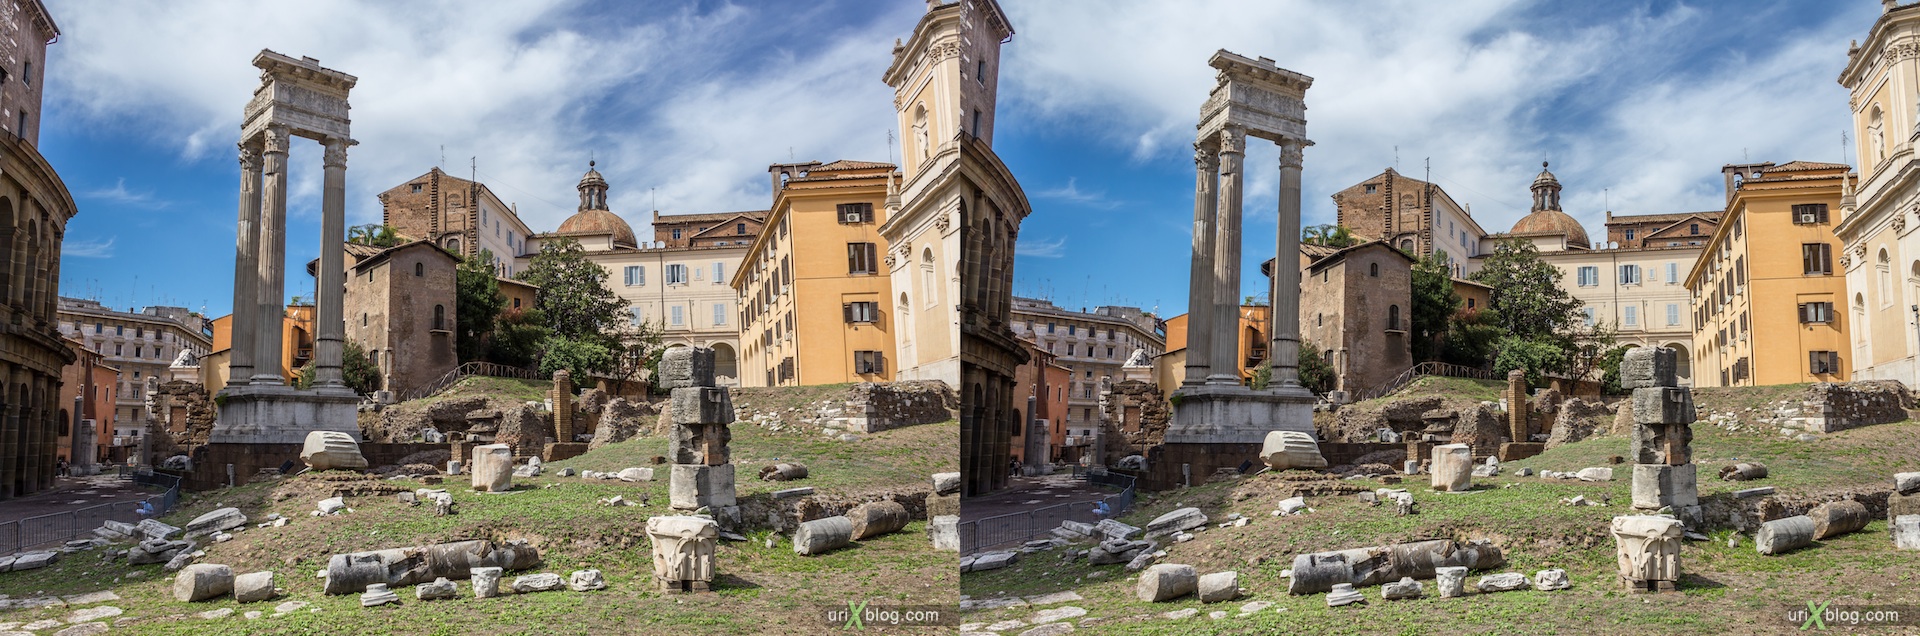 2012, Temple of Bellona, Theater of Marcellus, Temple of Apollo Sosianus, Rome, Italy, 3D, stereo pair, cross-eyed, crossview, cross view stereo pair